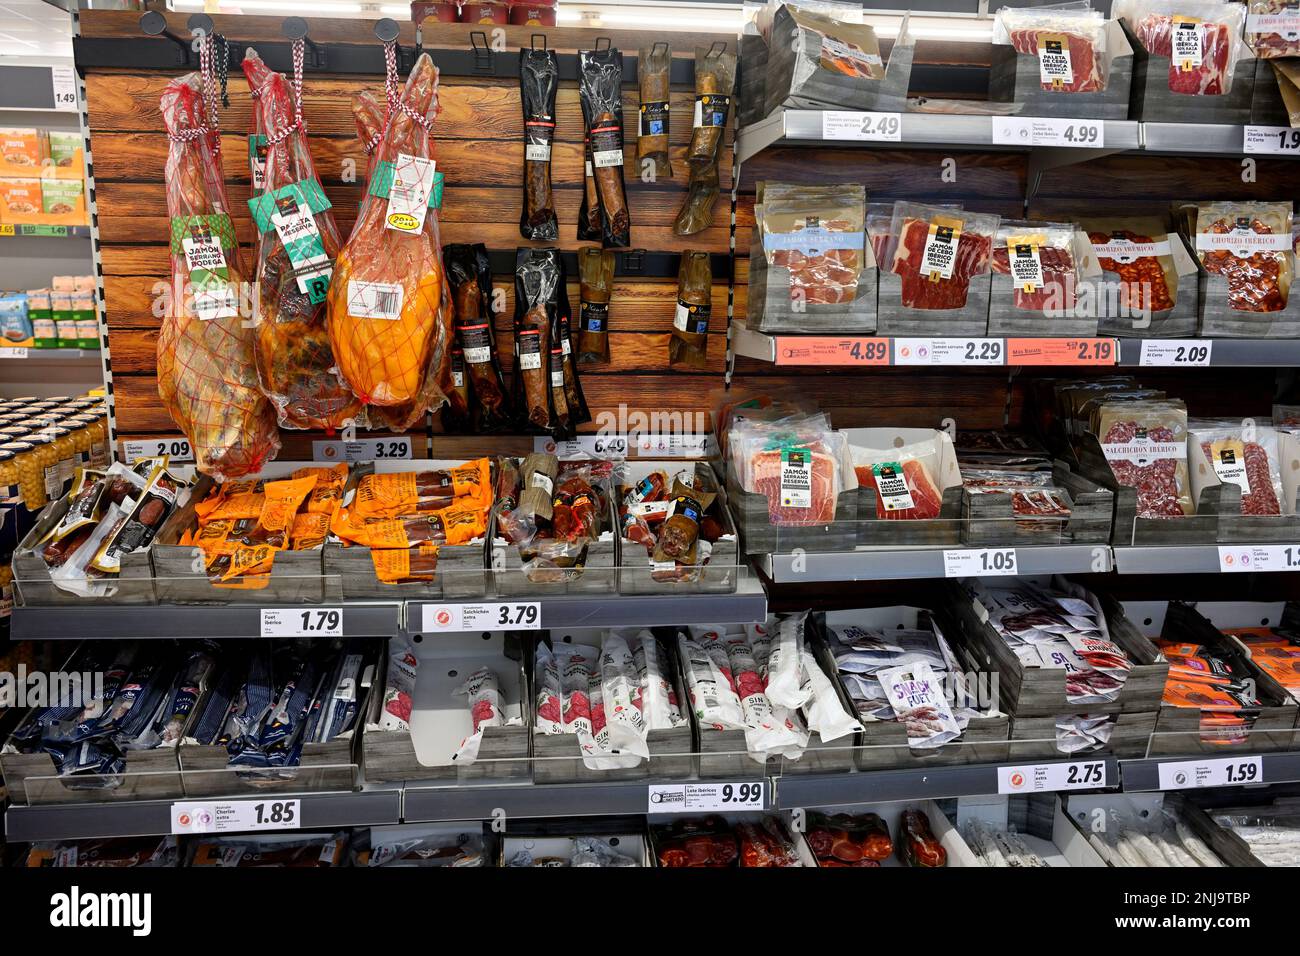 Supermarket shelves with packets of preserved cured meats, salami, chorizo, bacon, hams, sausages Stock Photo